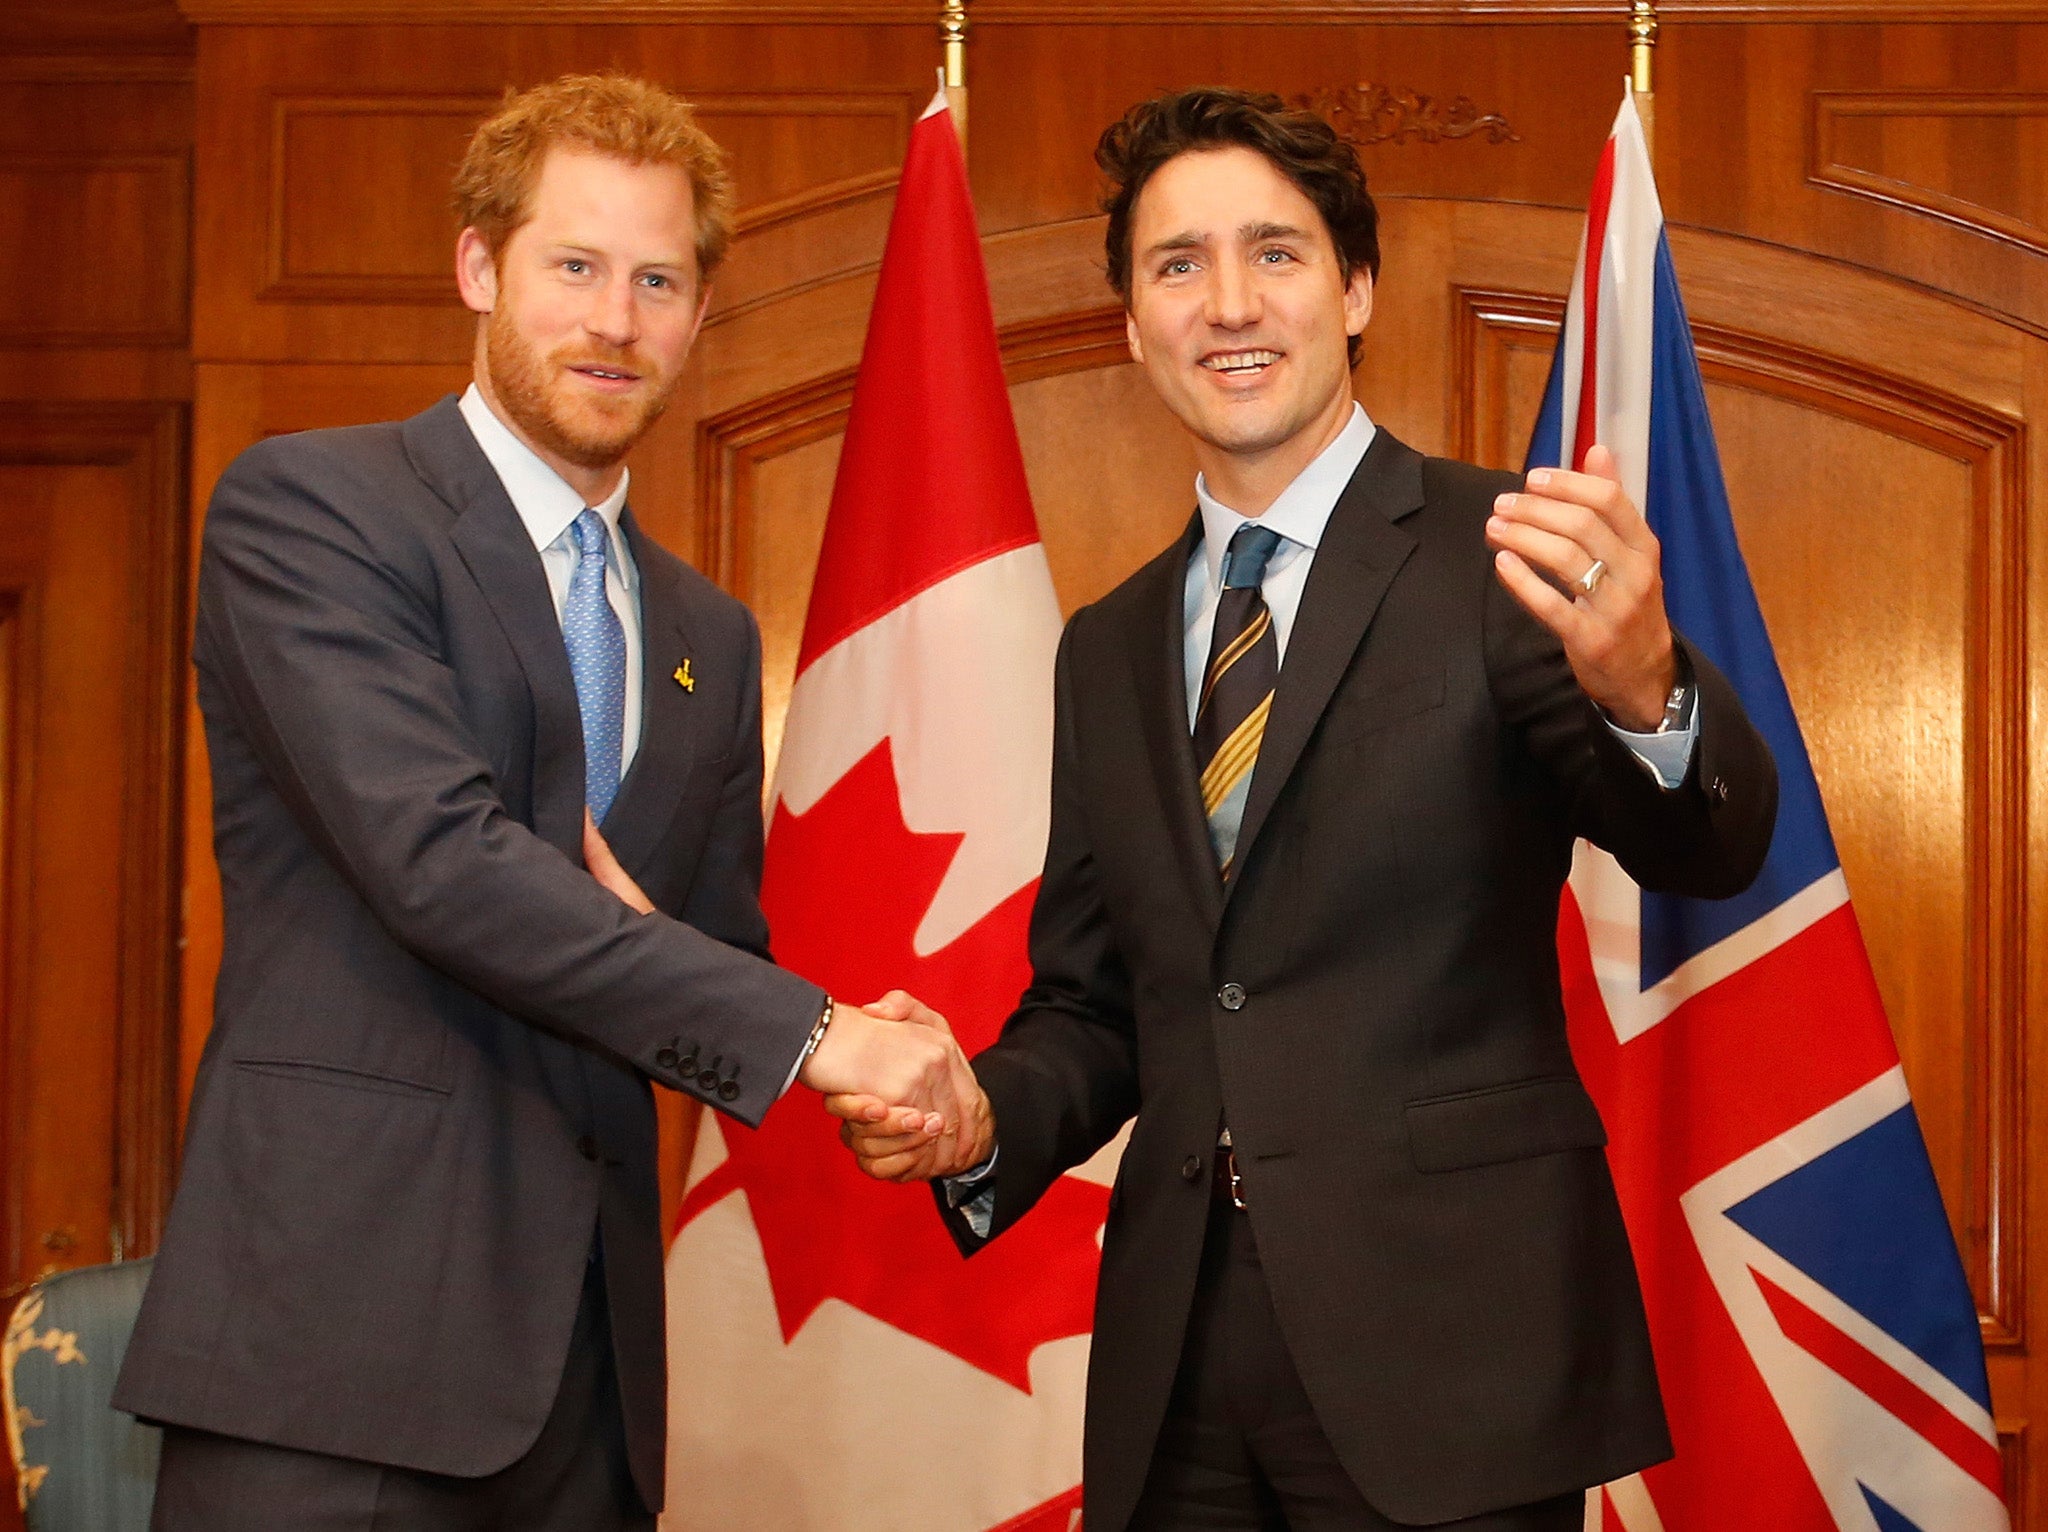 Prince Harry and Canadian Prime Minister Justin Trudeau